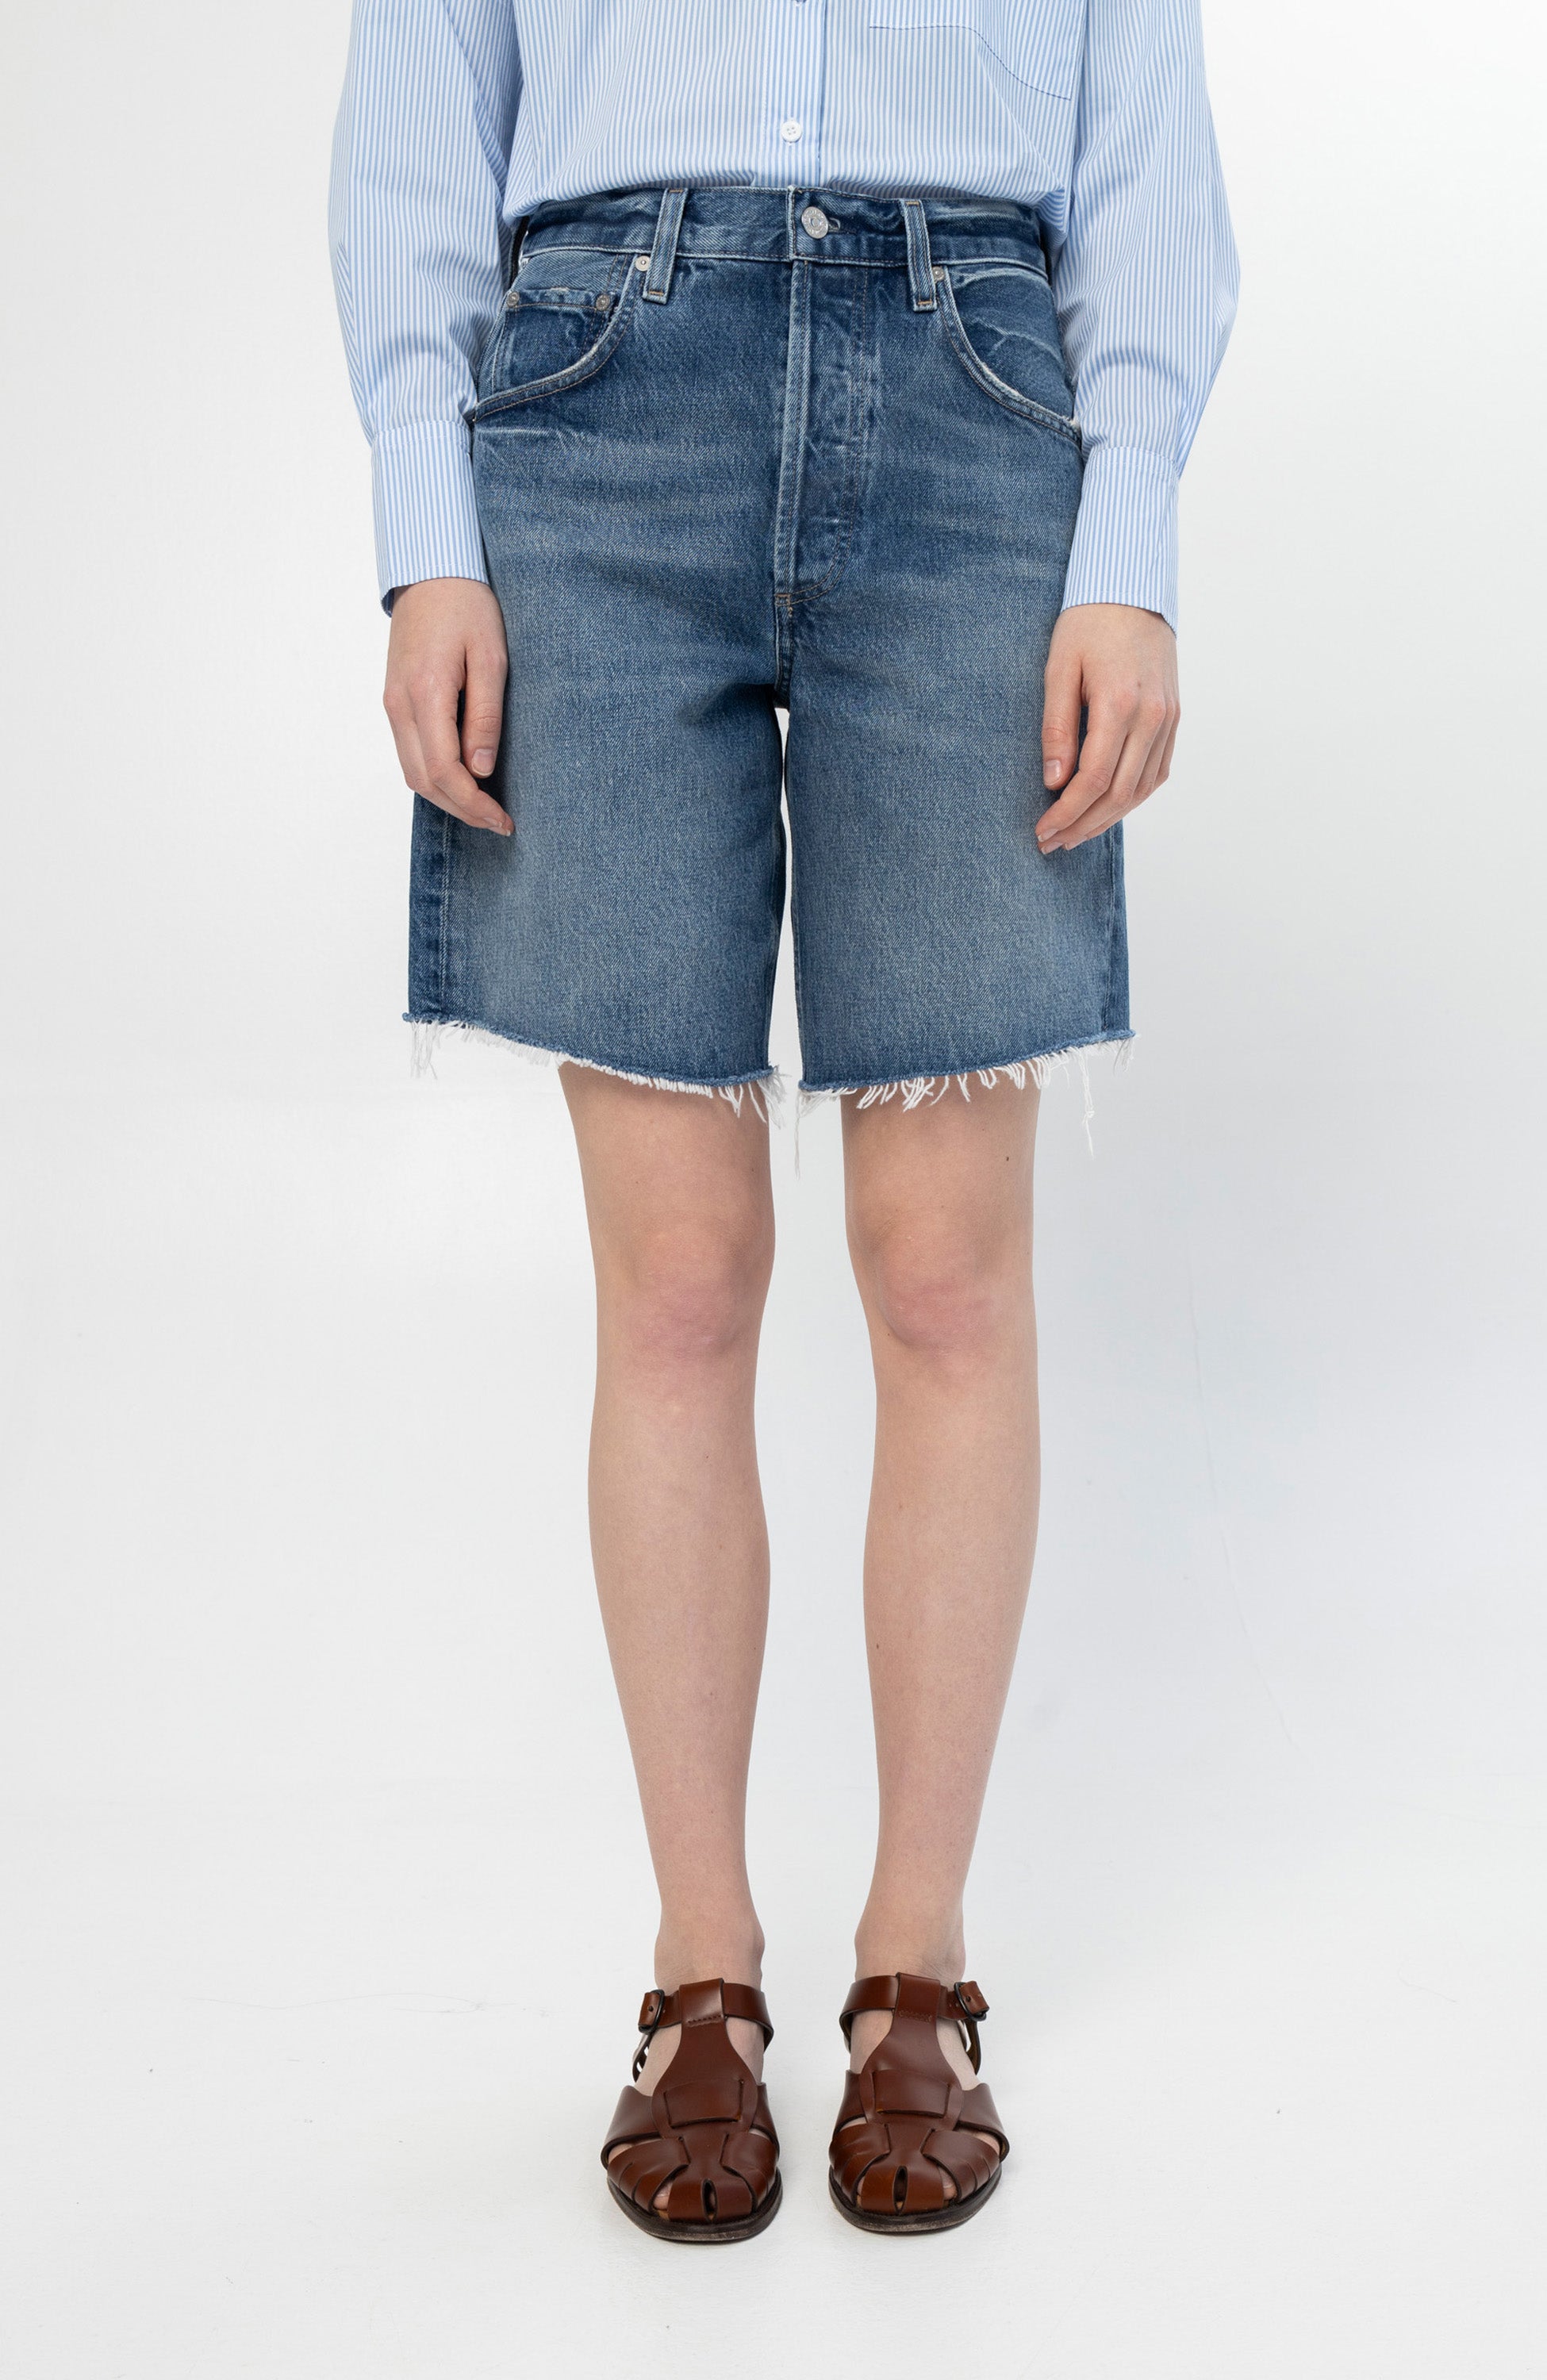 Citizens of humanity Blue Relaxed-fit denim shorts ayla image 2